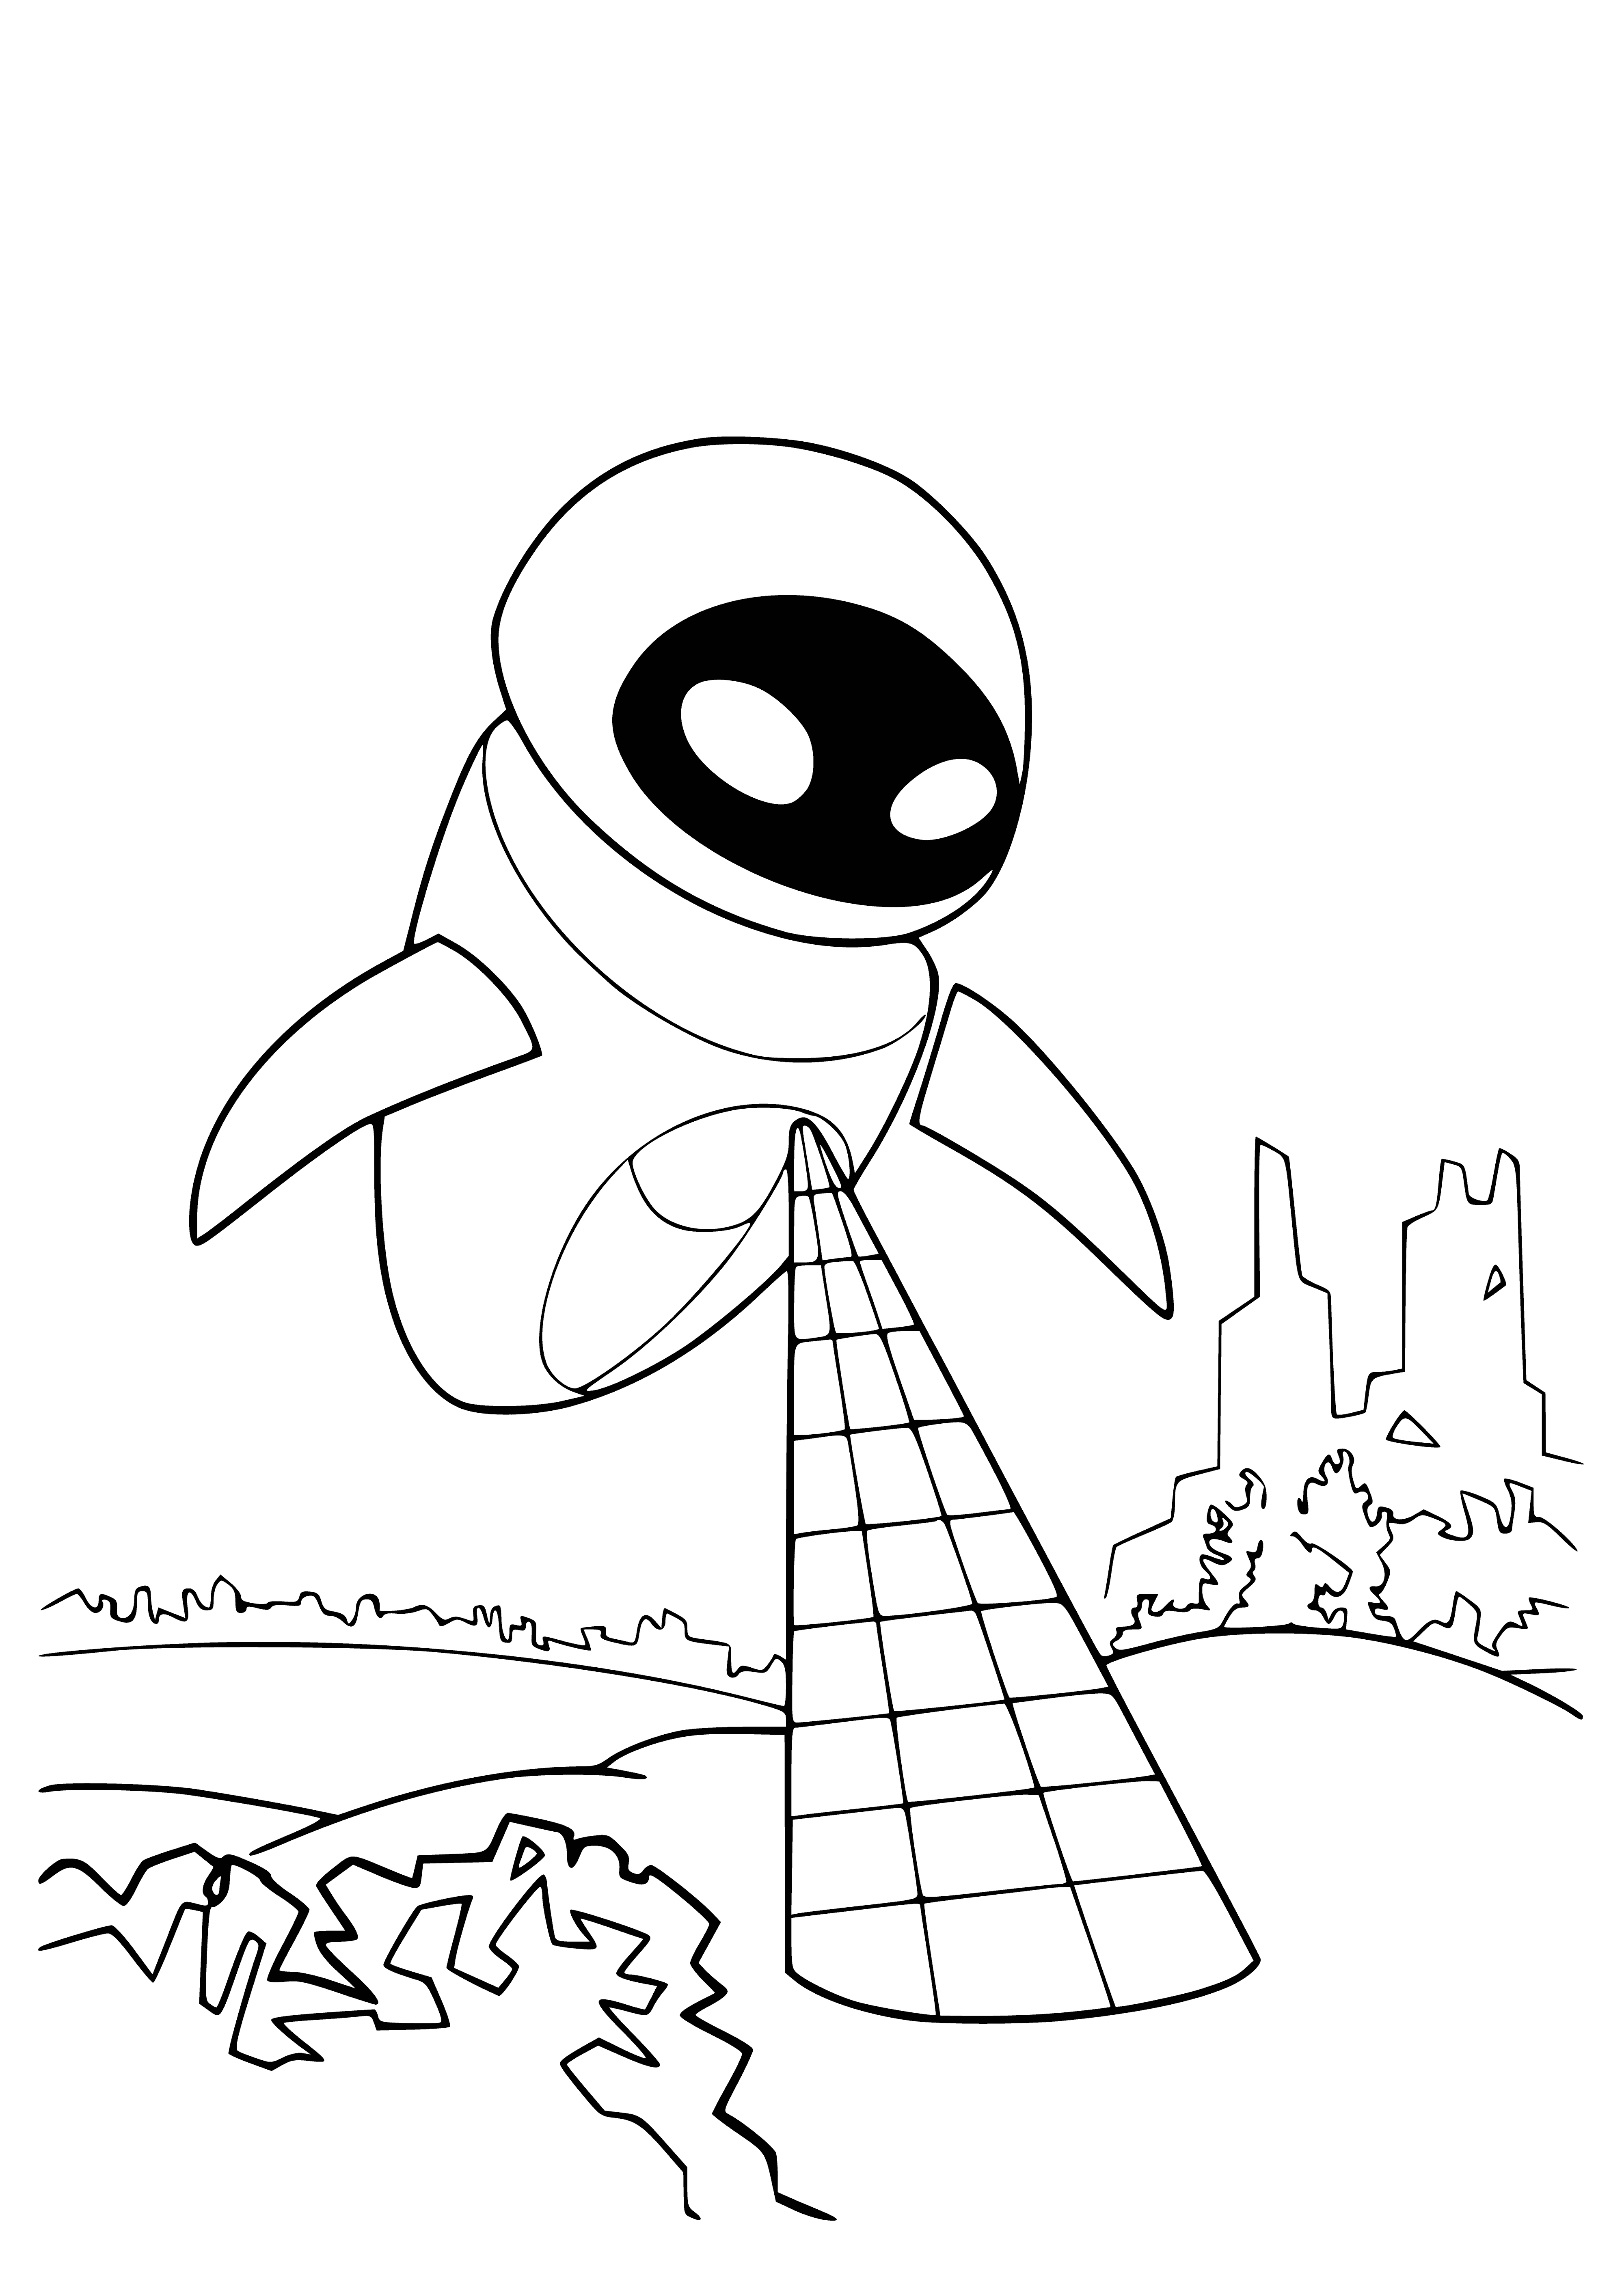 Program! coloring page